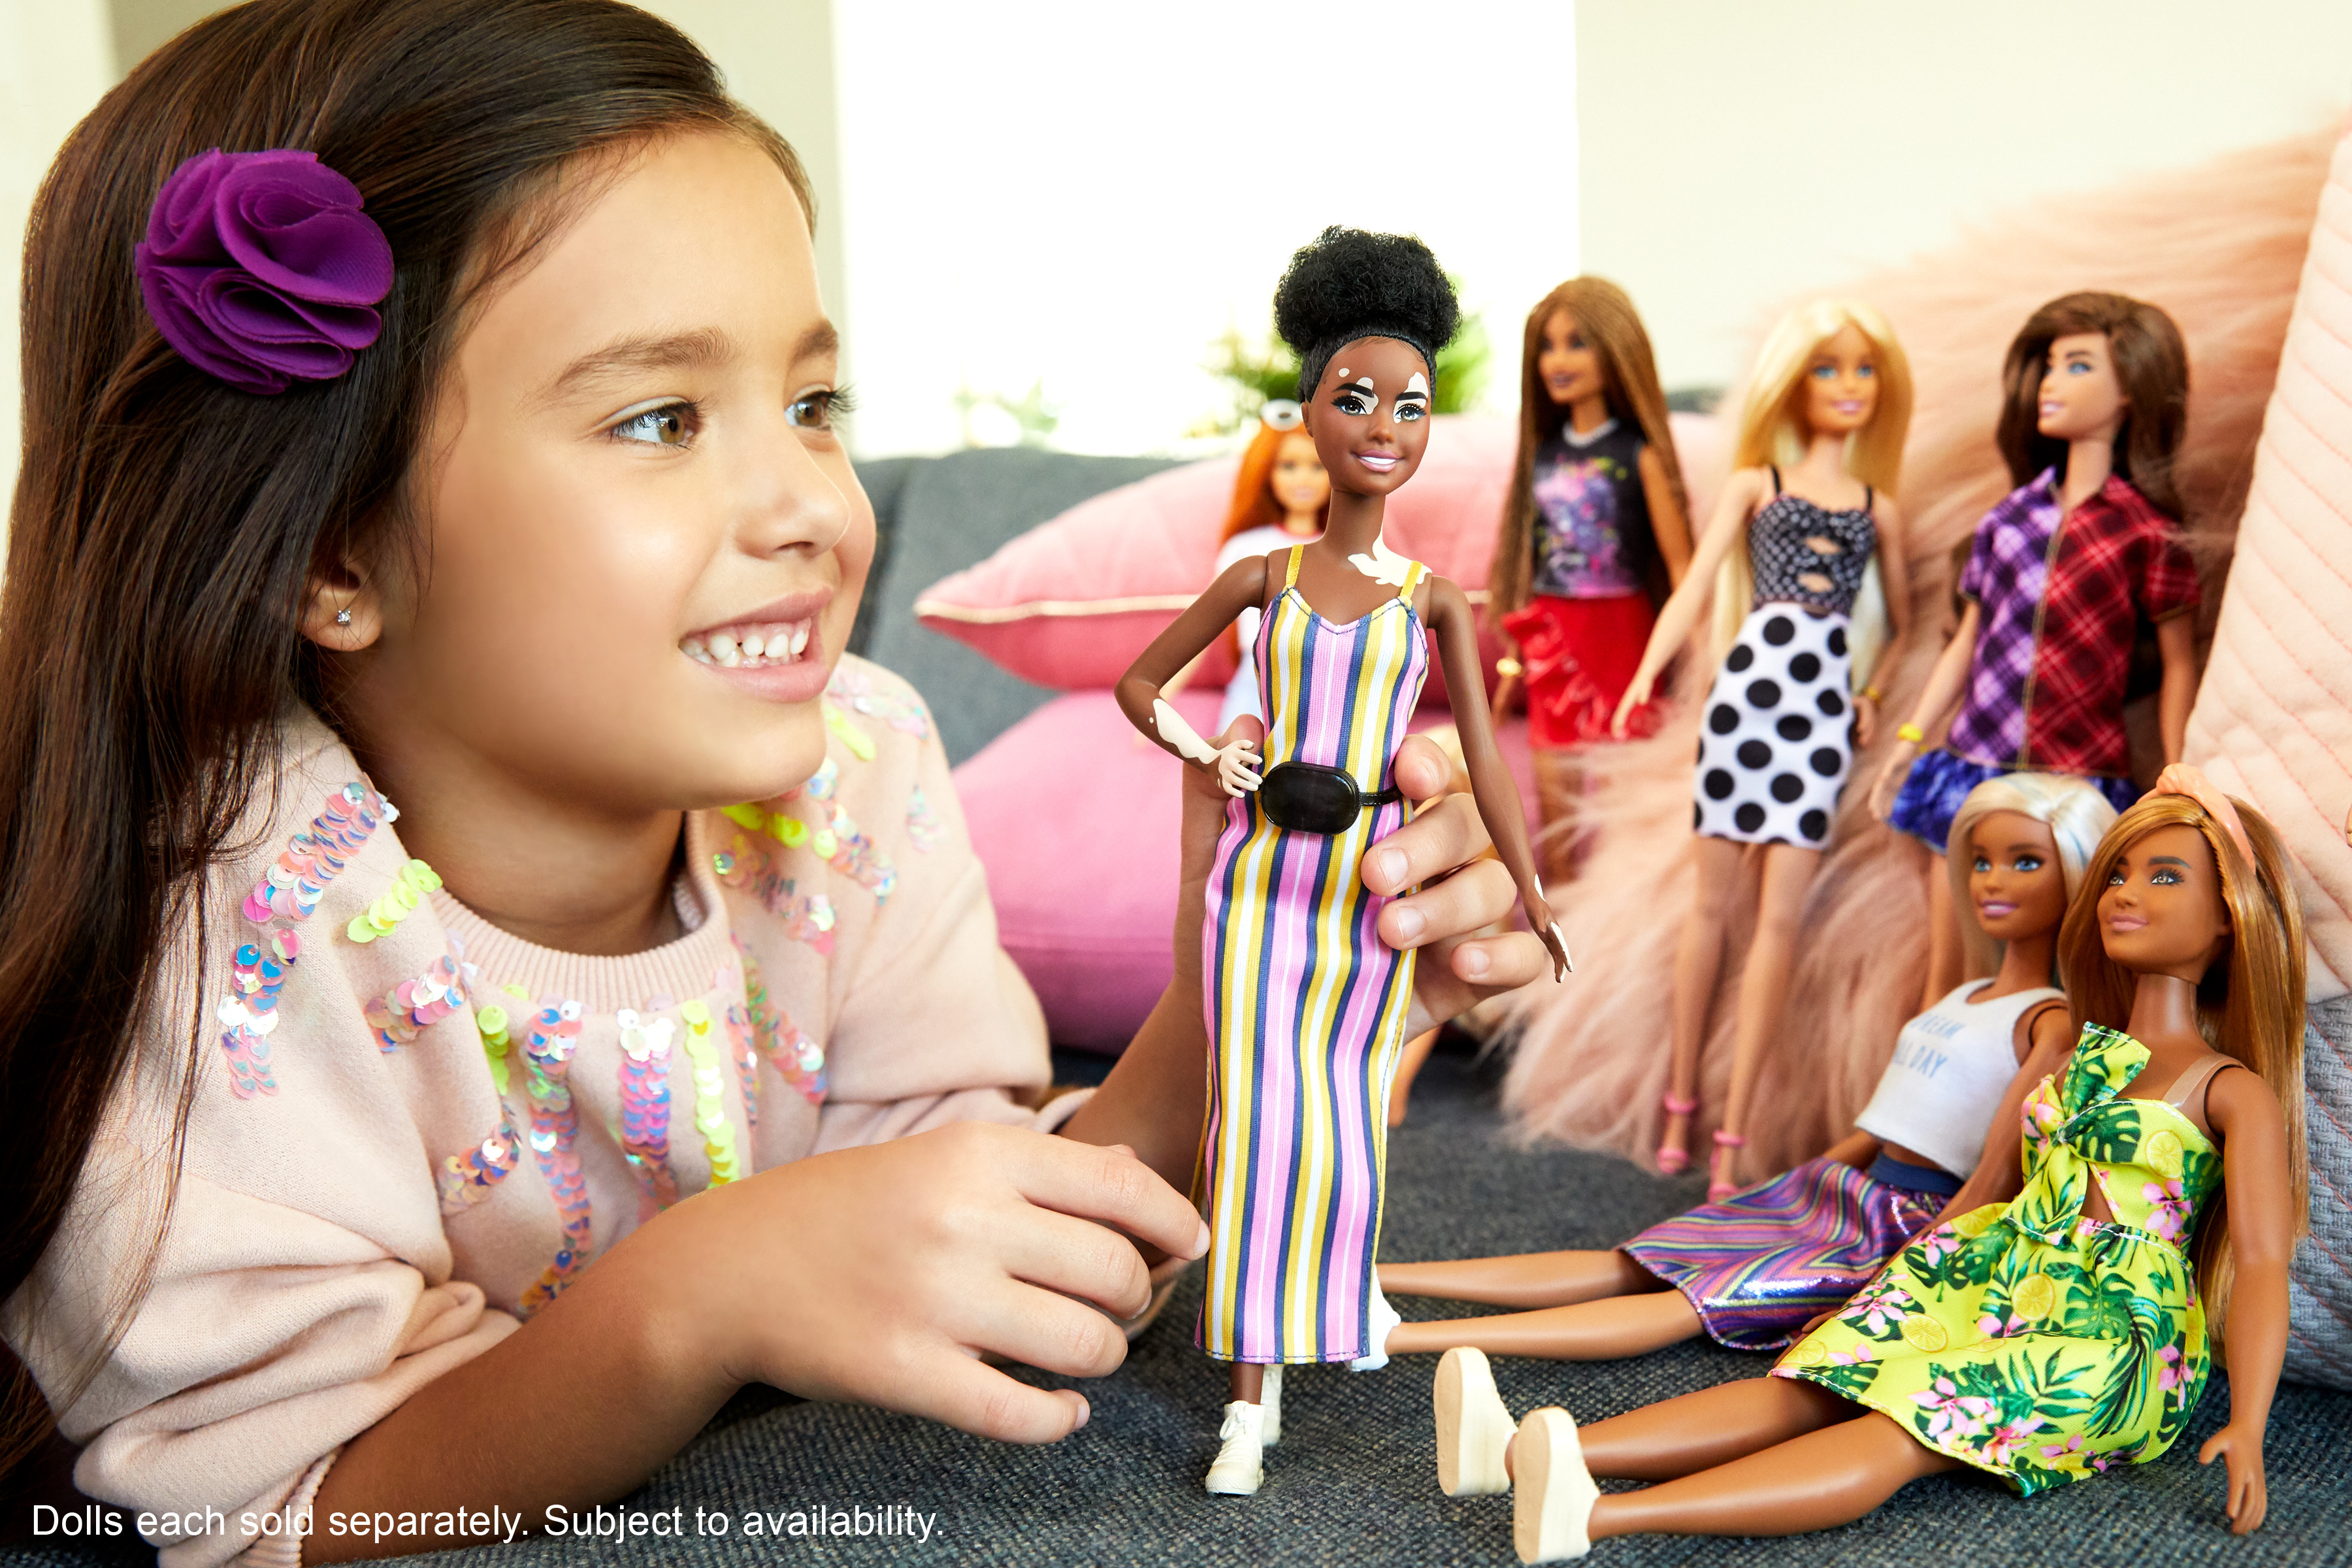 kids playing with barbie dolls